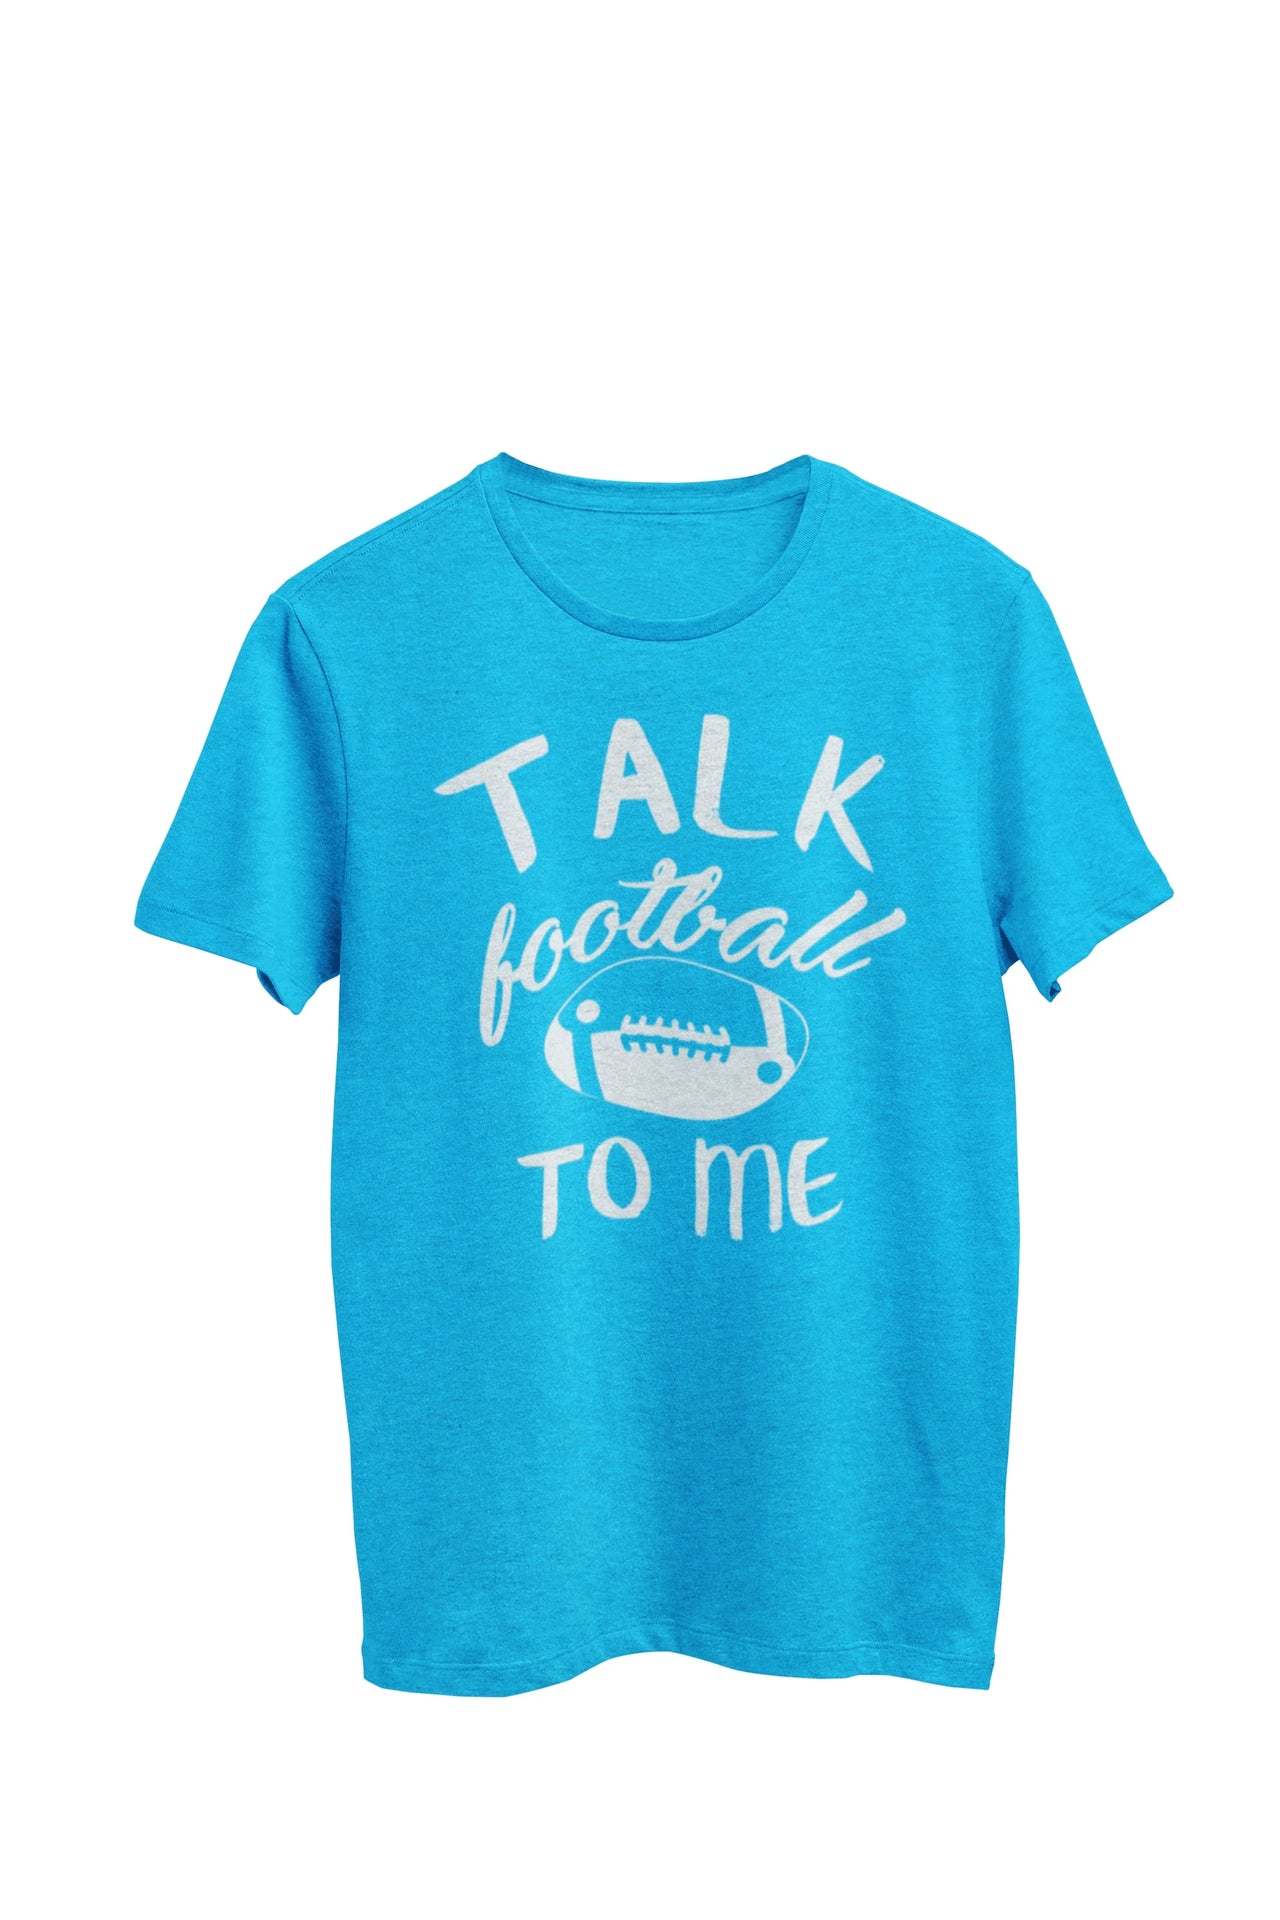 Turquoise Heather Unisex T-shirt featuring the text 'Talk football to me' surrounding a yin yang football design, created by WooHoo Apparel.